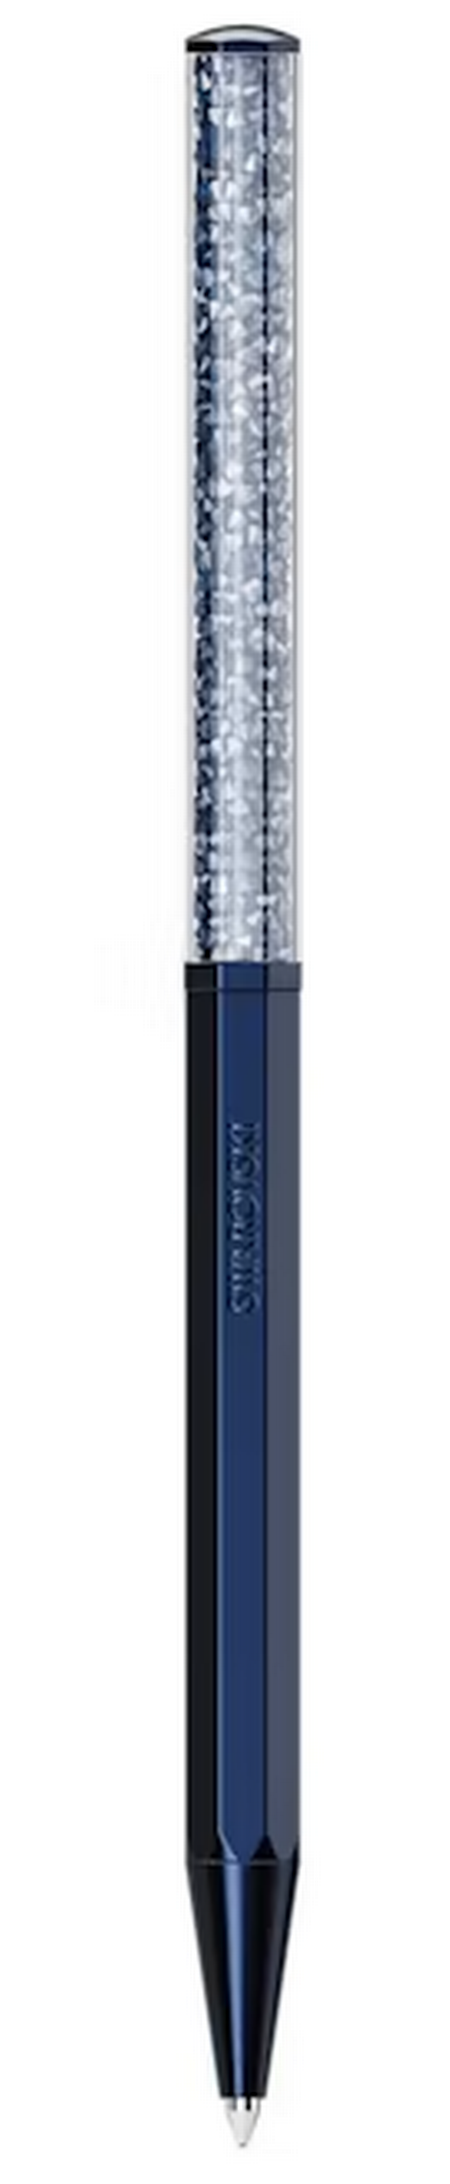 Swarovski Collections Crystalline Ballpoint Pen Octagon Shape, Blue, Blue Lacquered